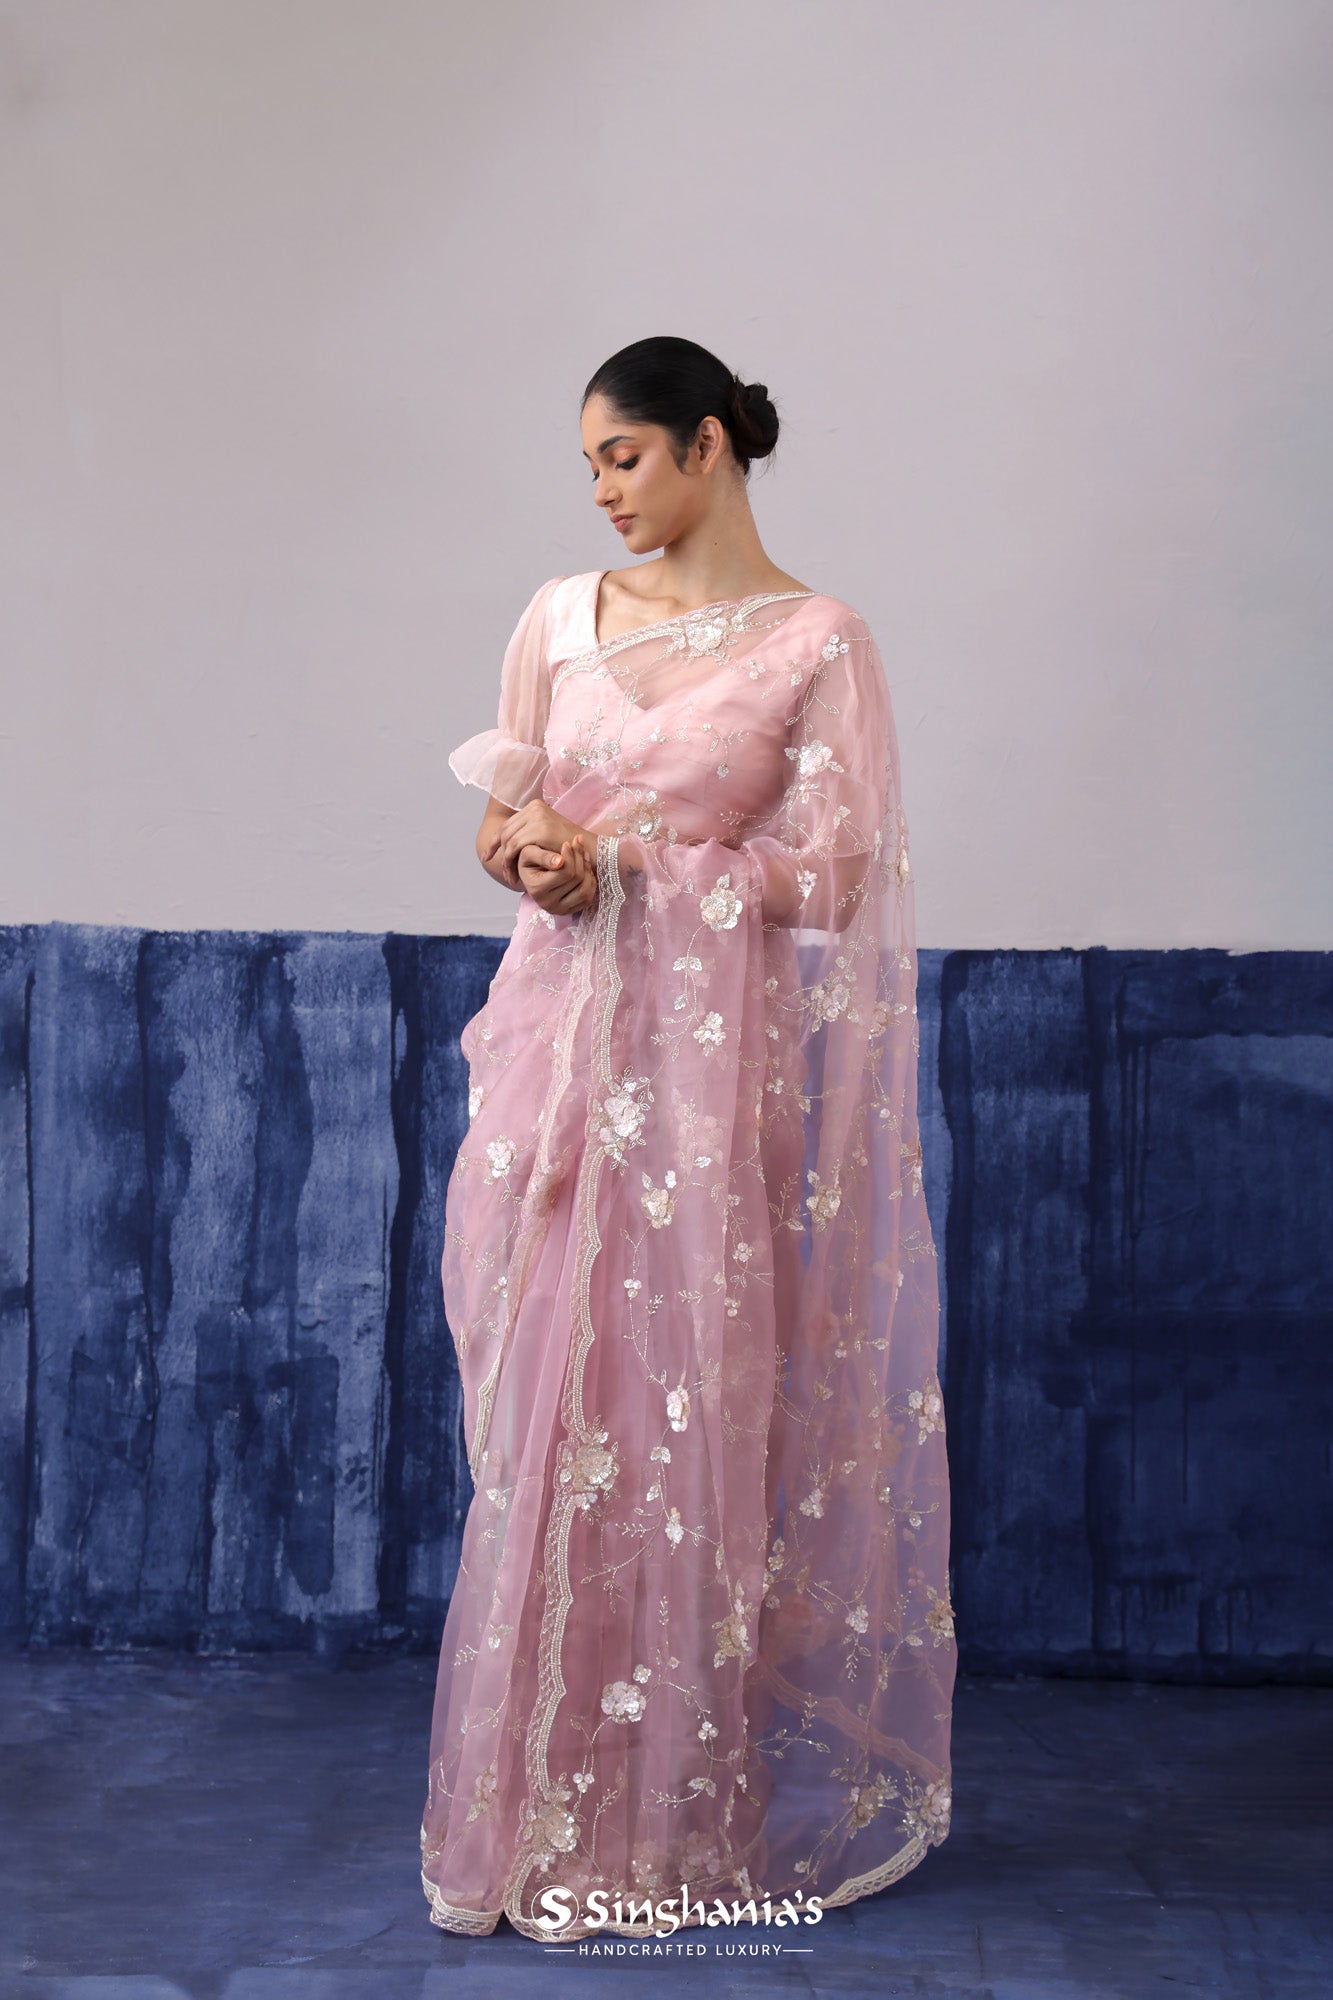 Lemonade Pink Embroidered Tissue Organza Saree With Jaal Pattern